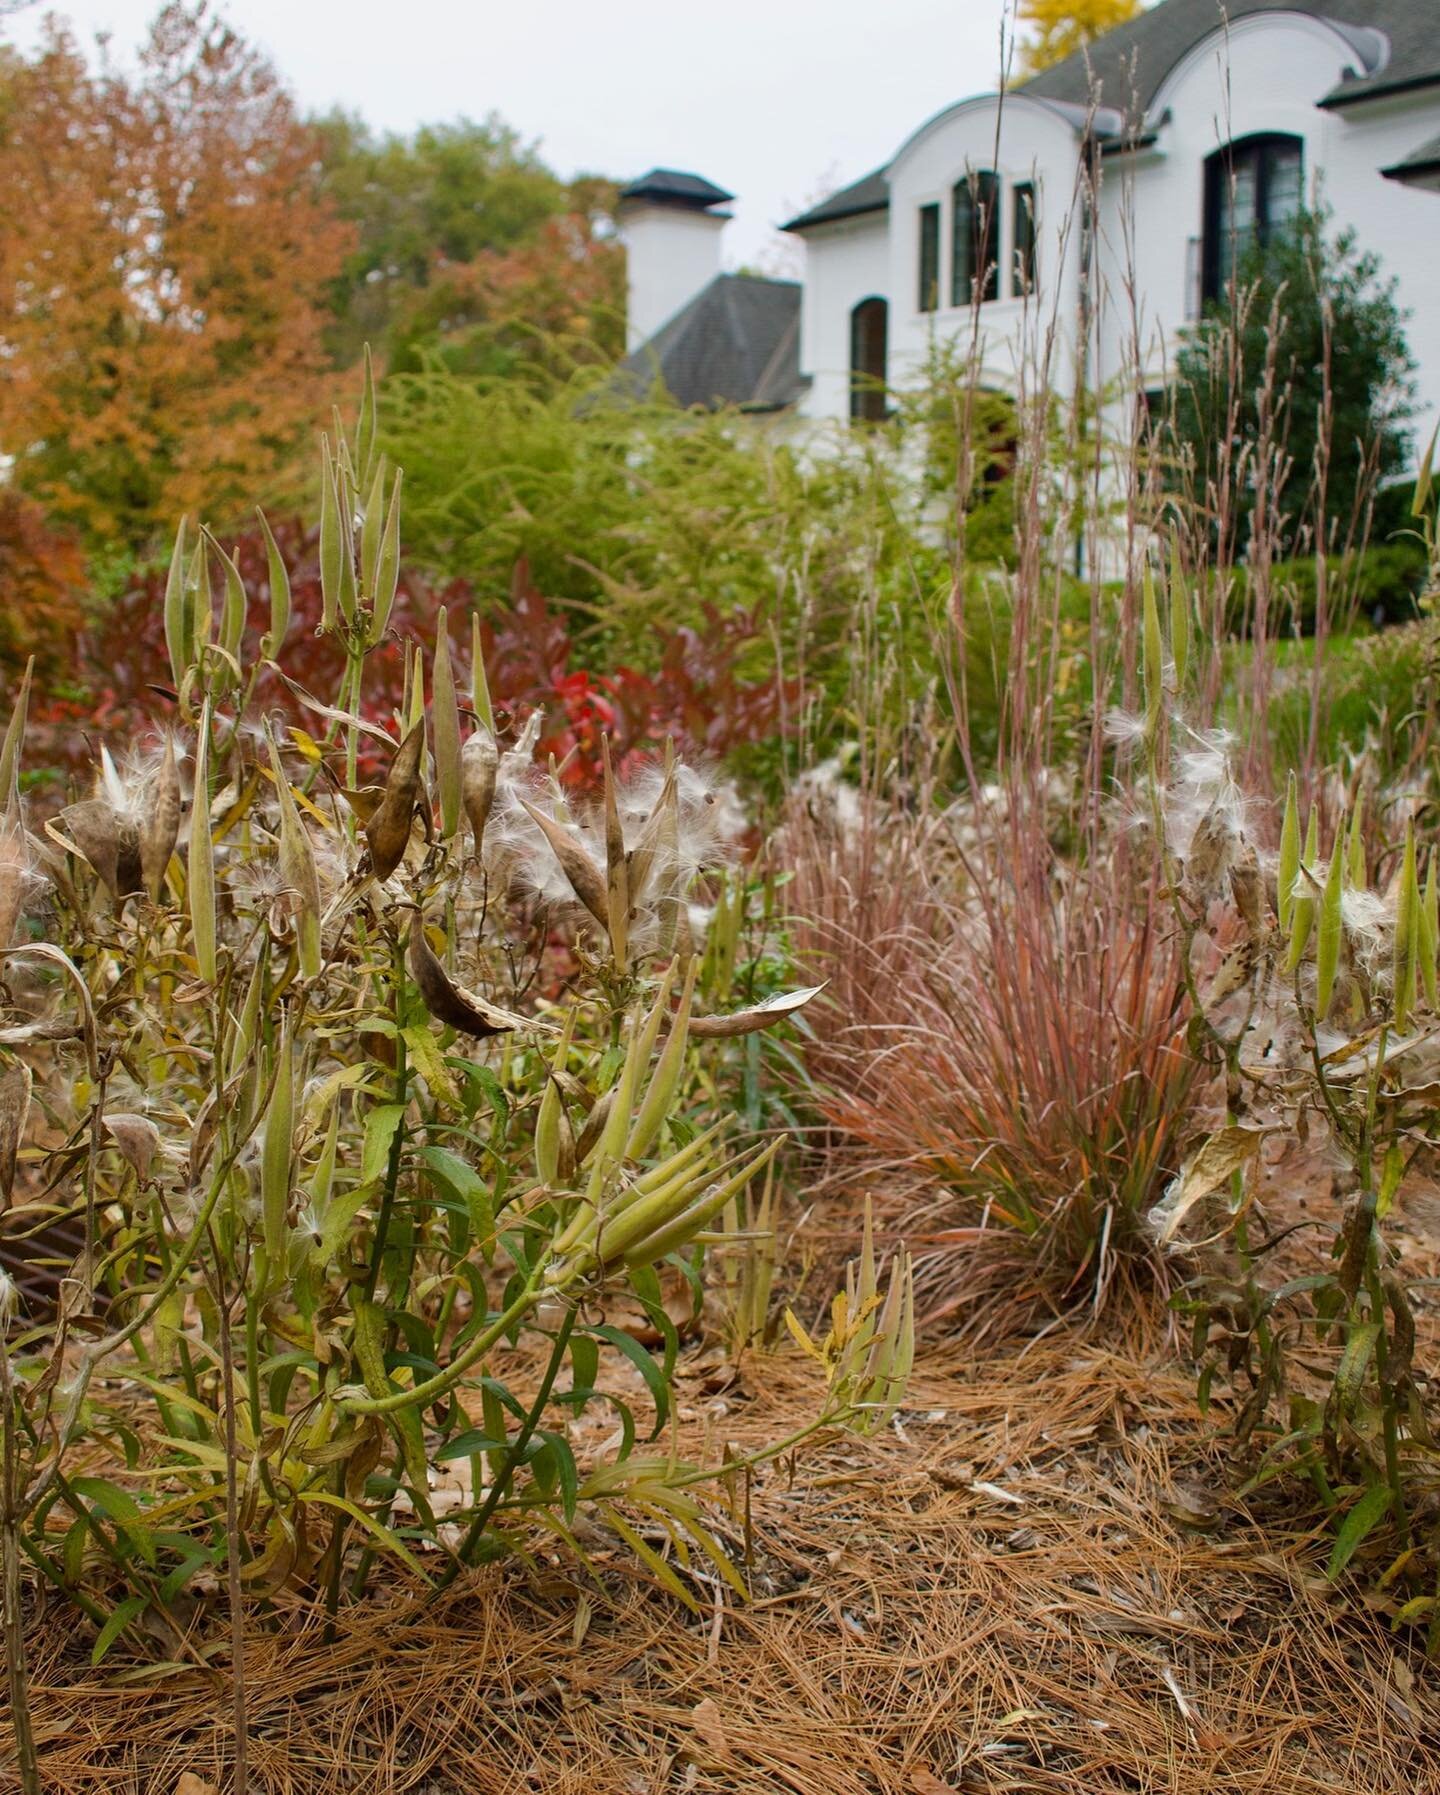 Sometimes the fluffy seed heads of orange milkweed just work.  Planted here with little bluestem grass against a backdrop of Virginia sweetspire and wrinkle-leaf goldenrod, the fall textures and colors create a moment of pause to reflect on seasonal 